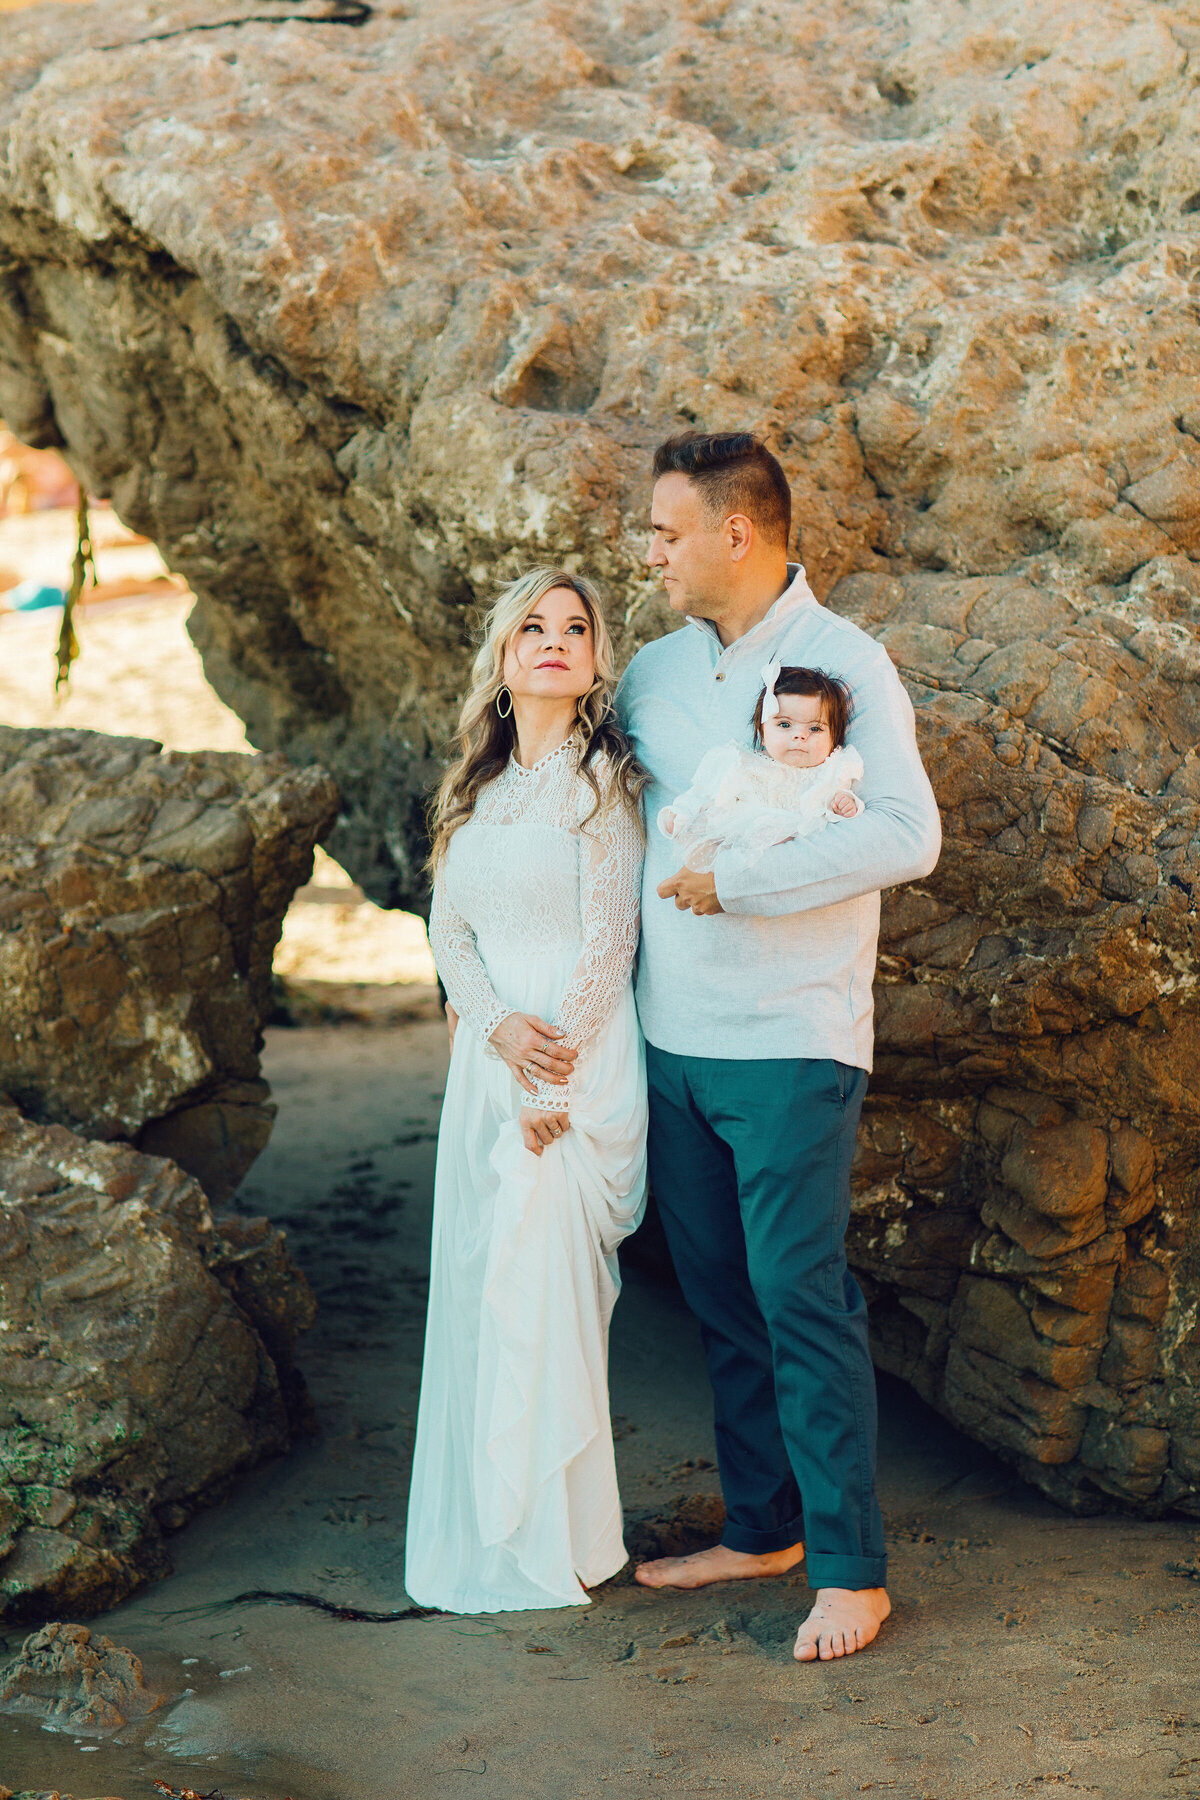 Family Portrait Photo Of Couple Standing Beside a Rock With Their Baby Los Angeles